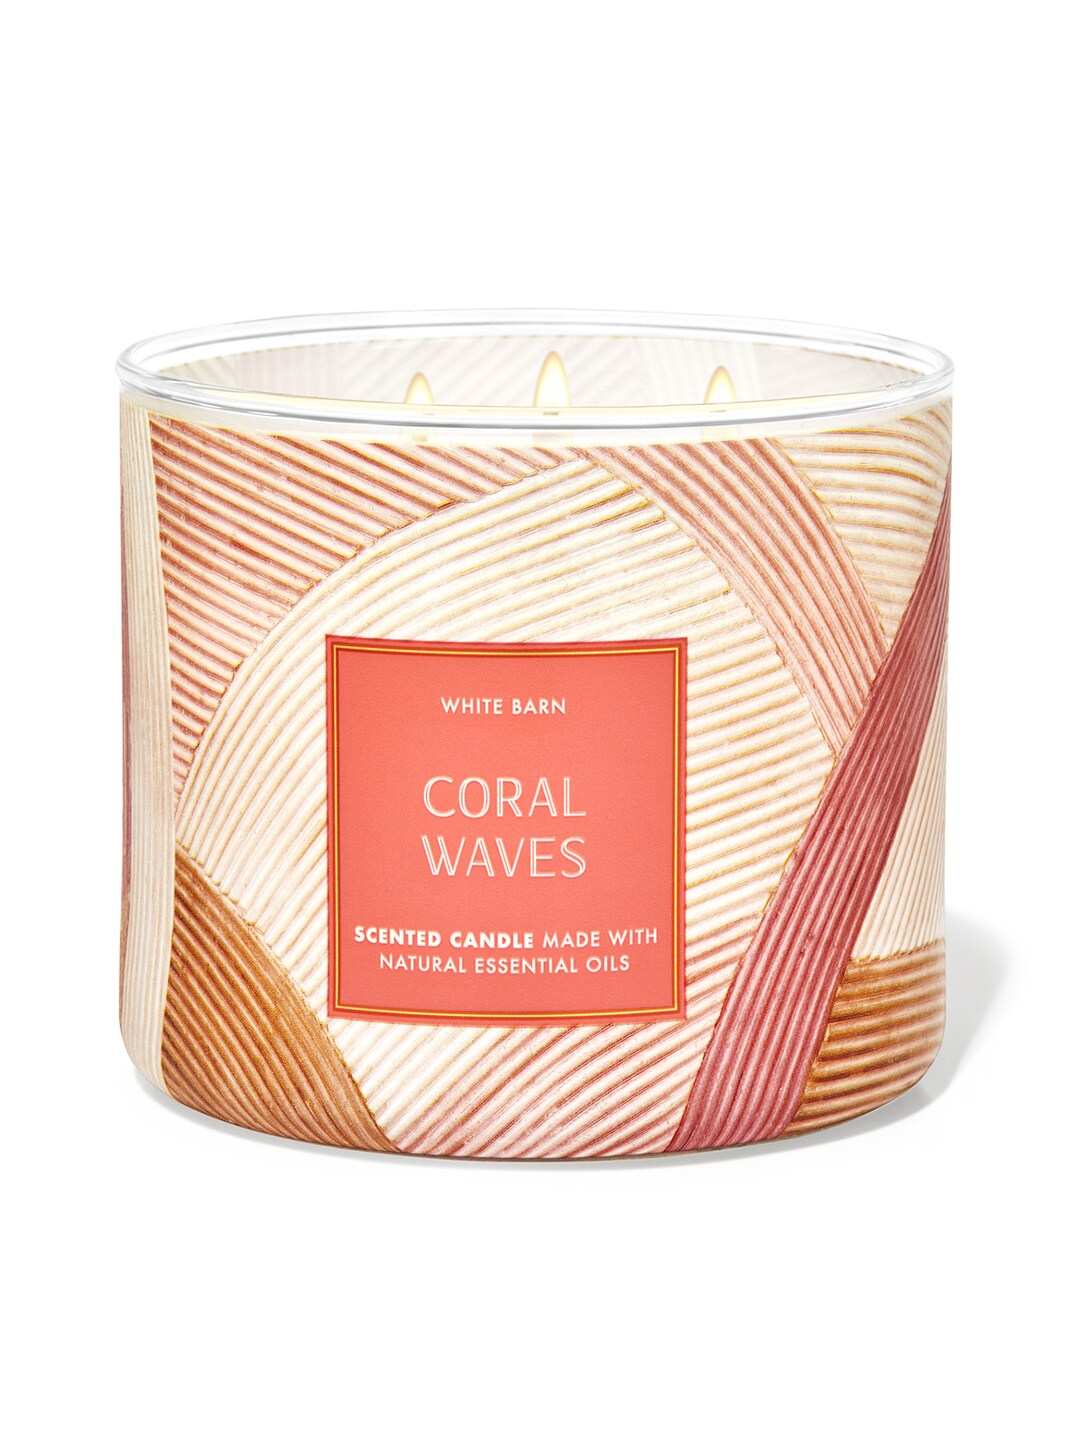 Bath & Body Works Coral Waves 3-Wick Candle - 411 g Price in India